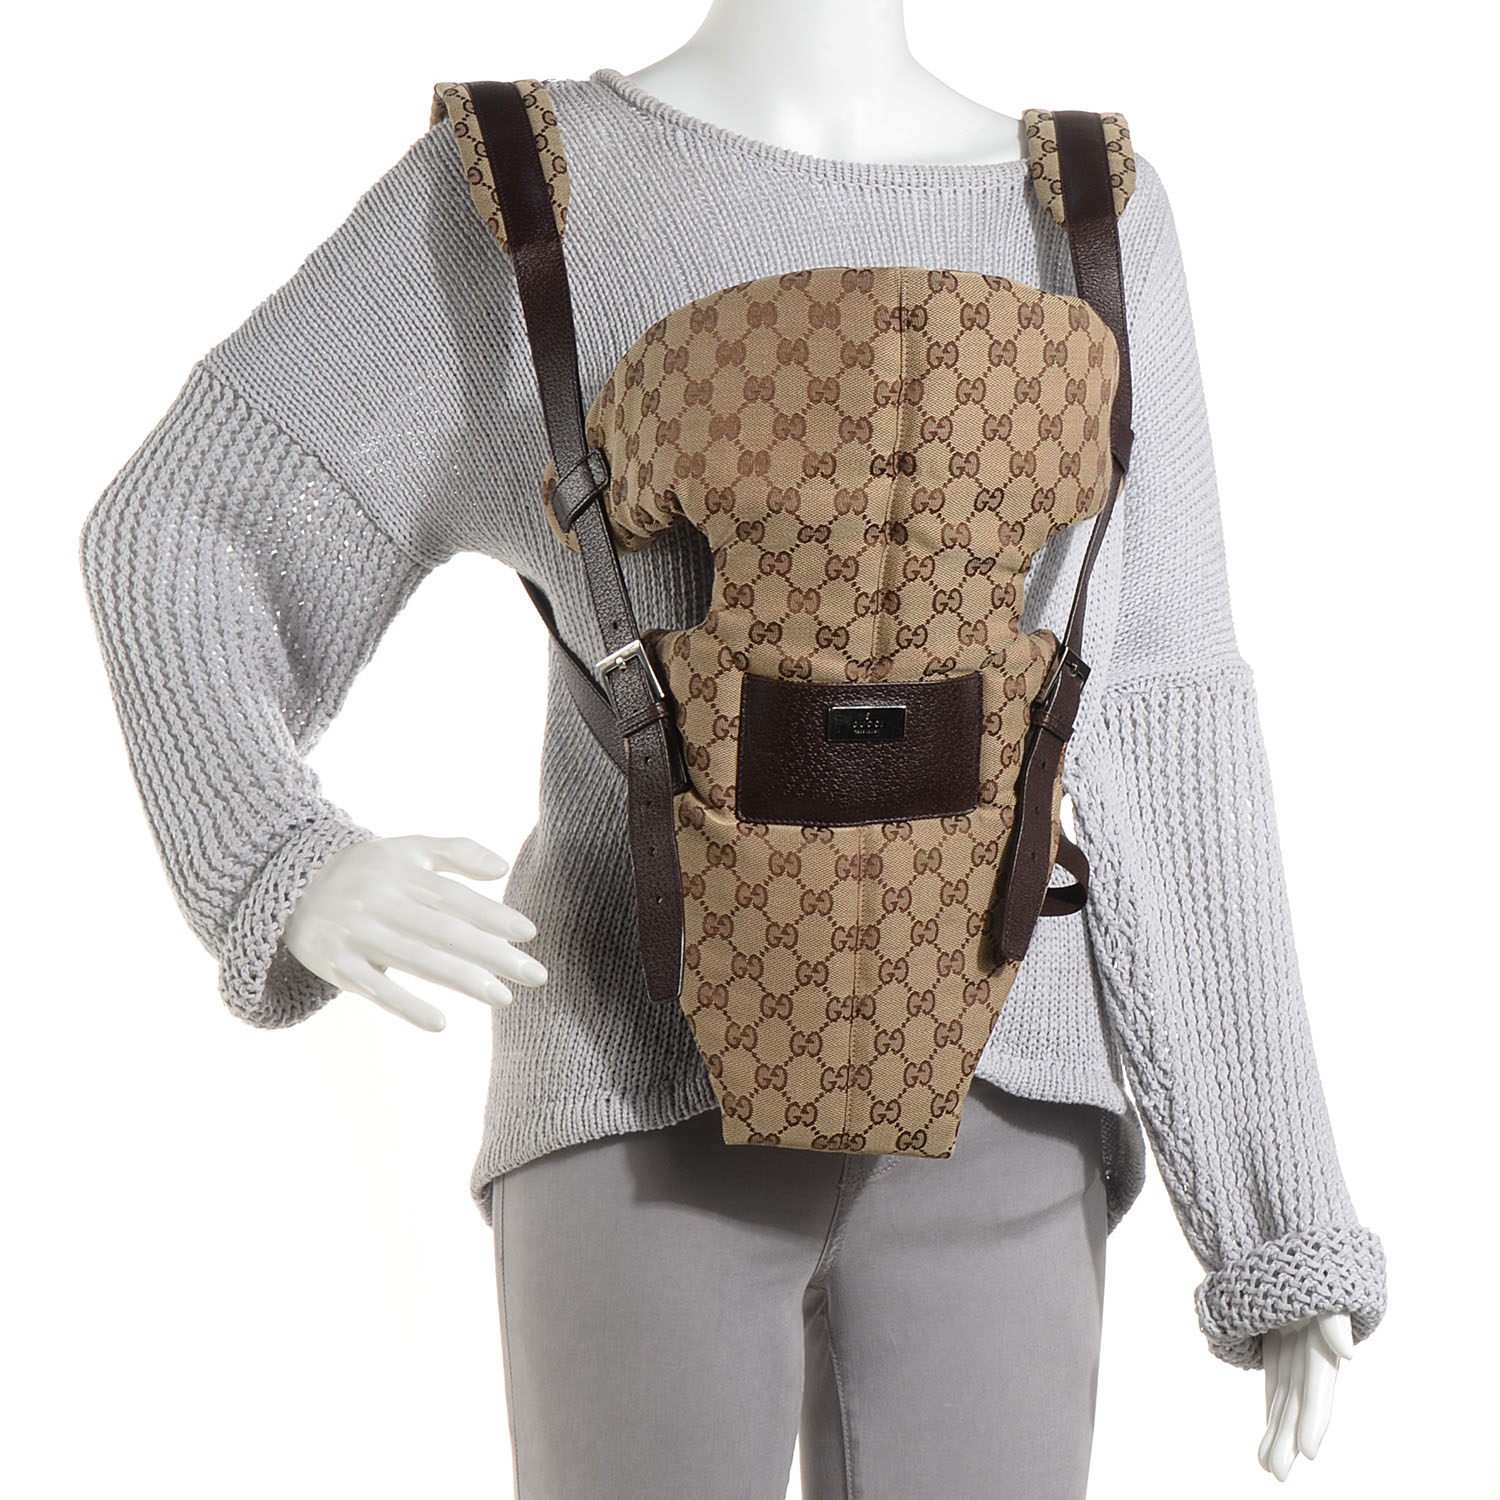 gucci baby carrier off 62% - www.mjmills.in